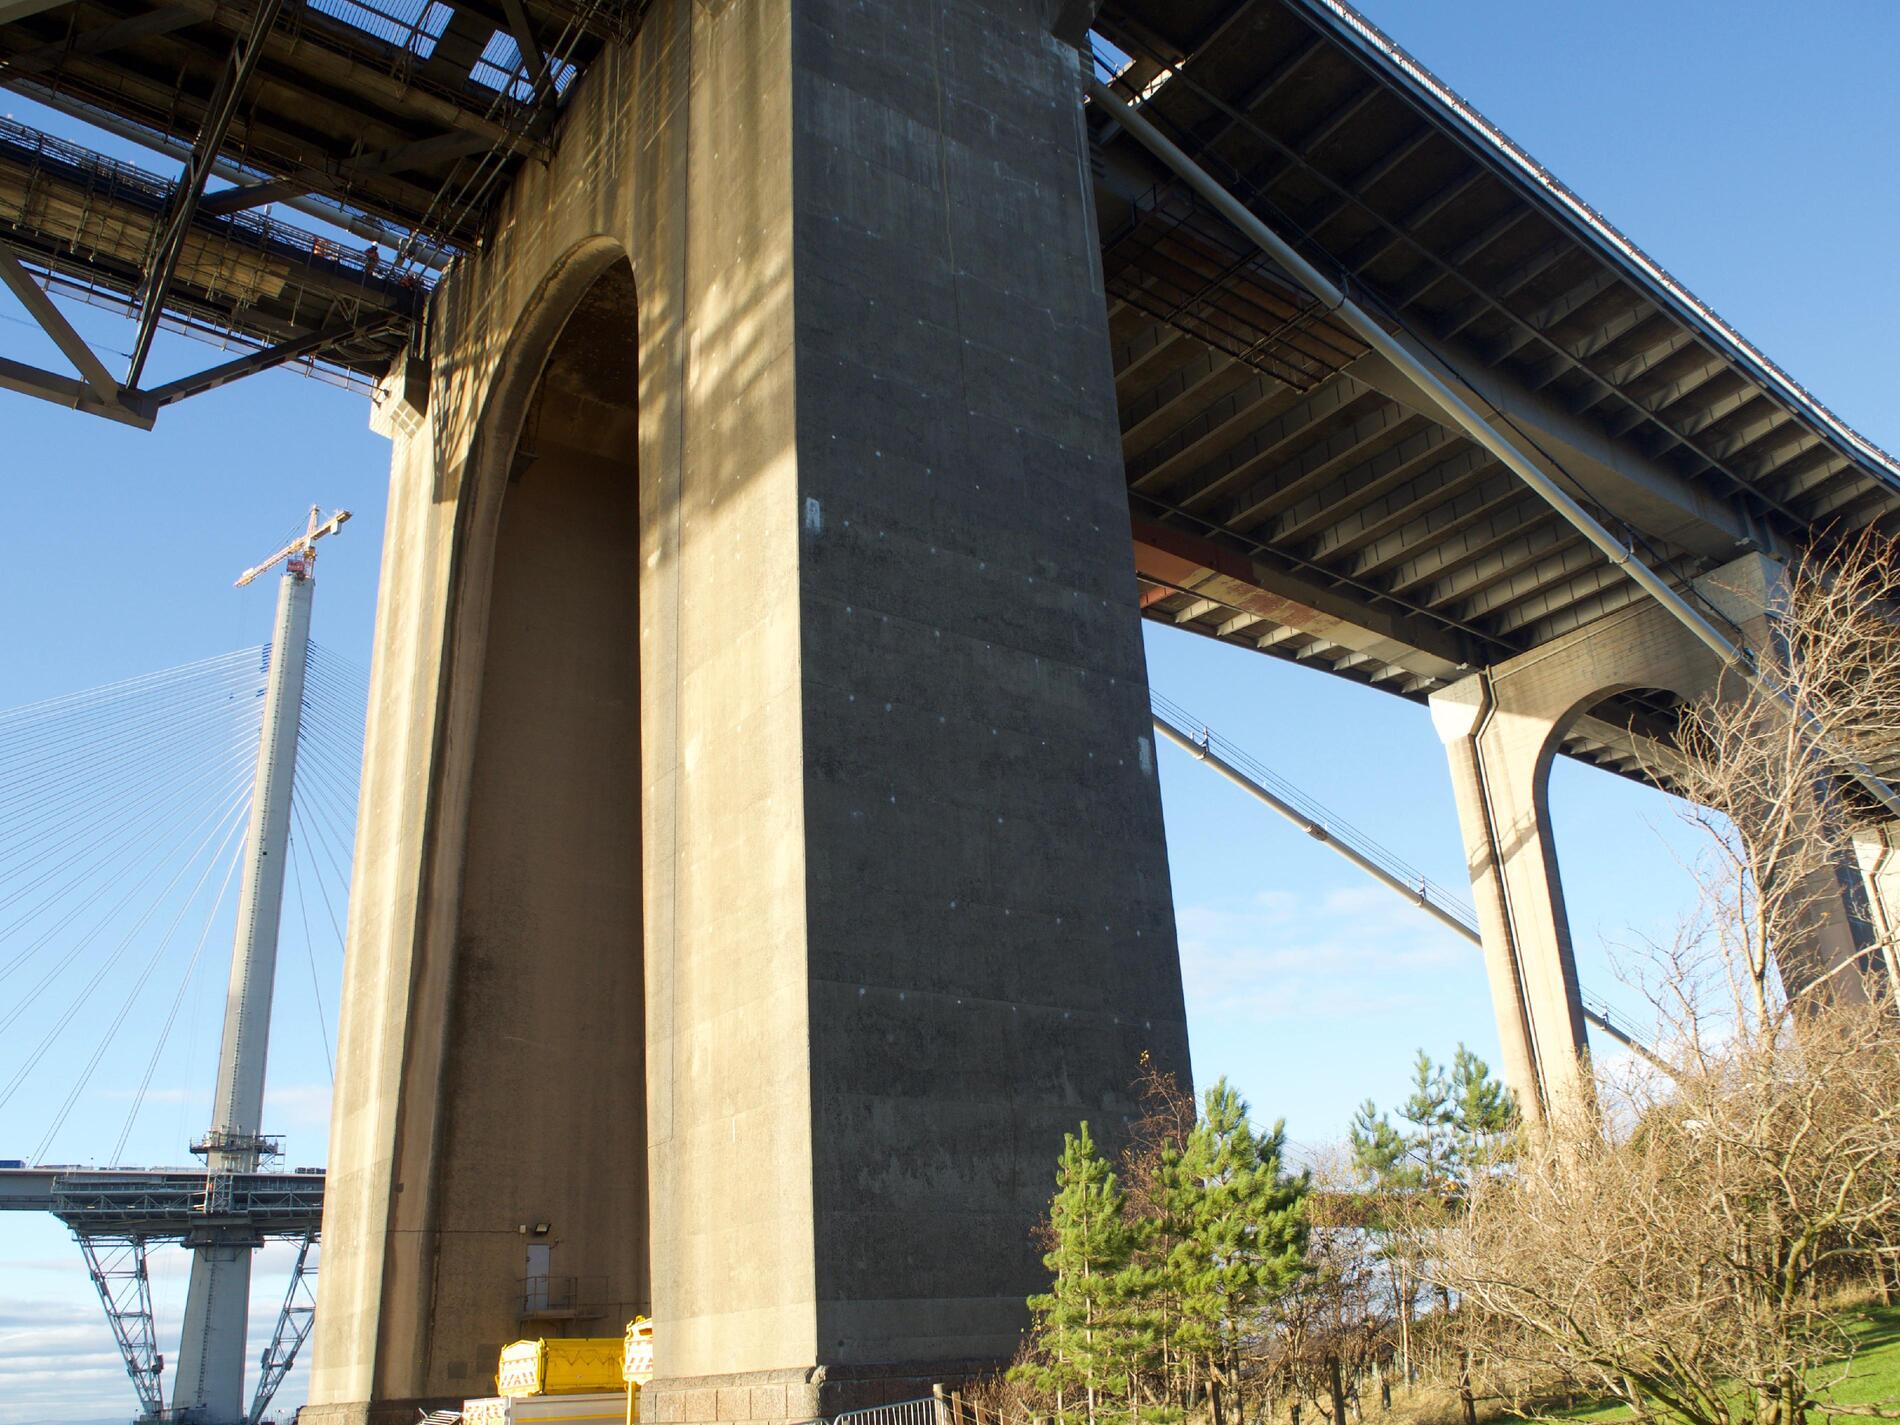 A single concrete support, with the ridged underside of the bridge visible.